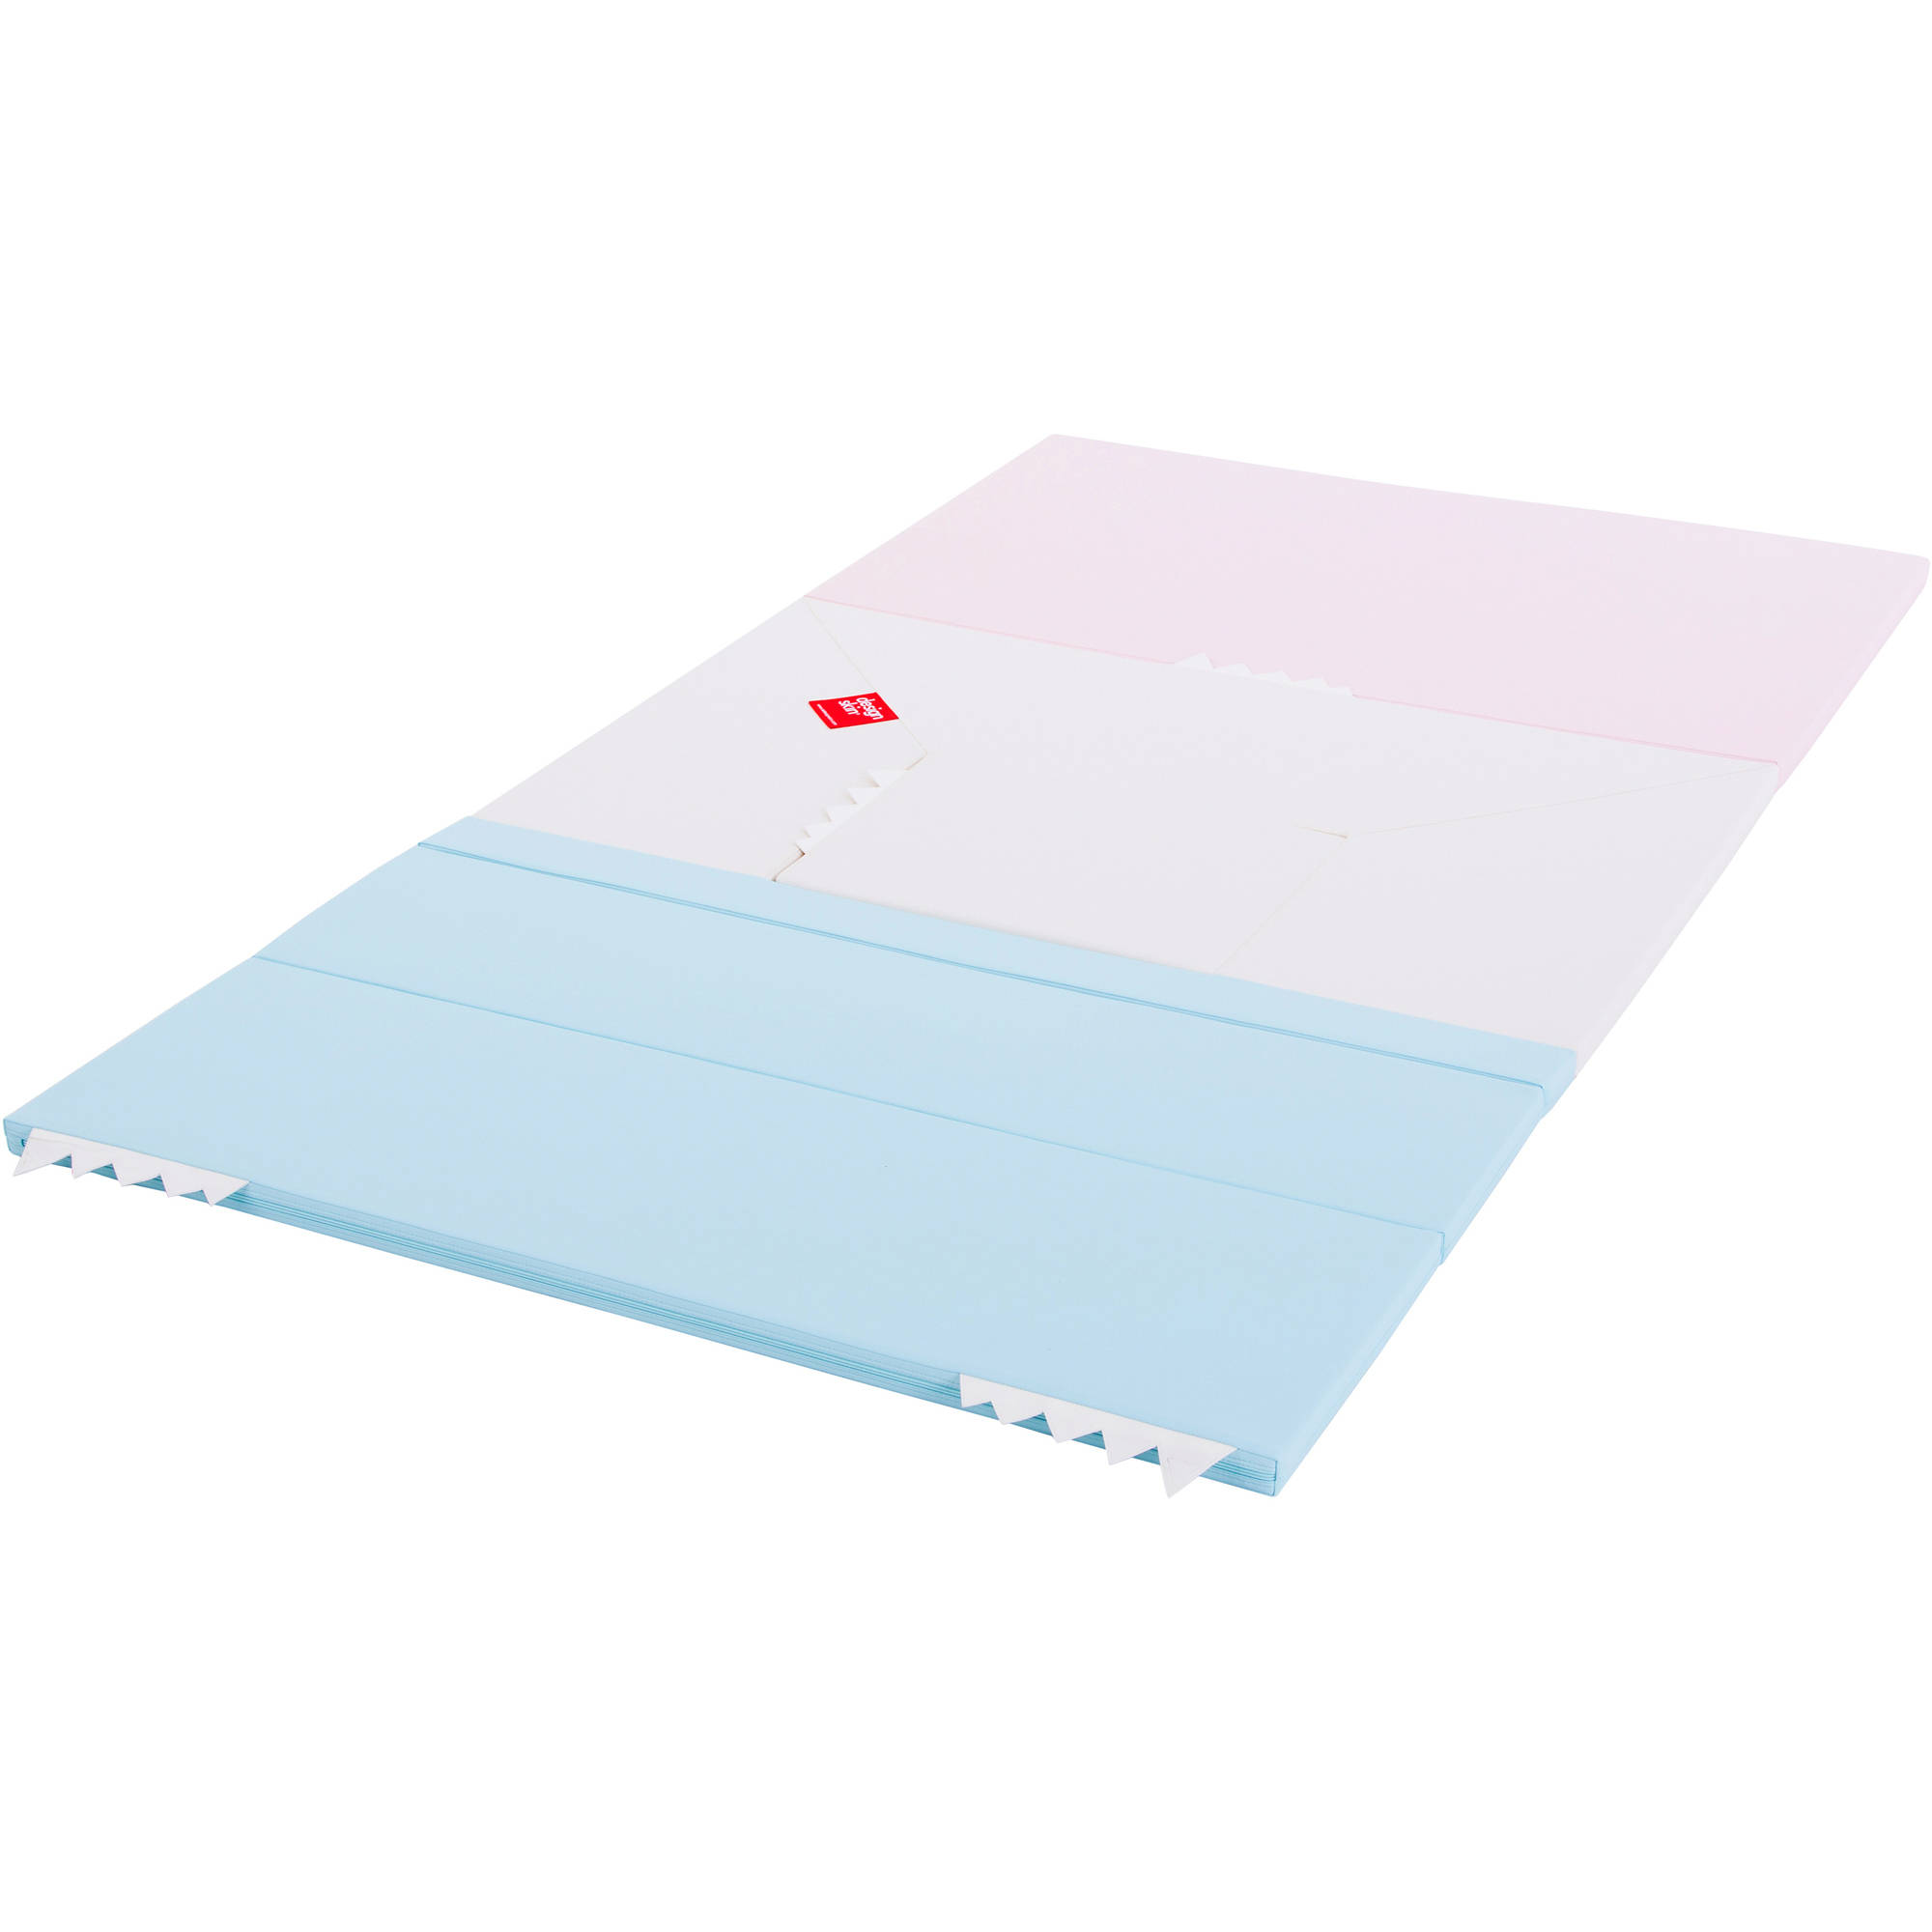 Transformable 53.1" House Play Mat for Kids, Milk - image 3 of 9